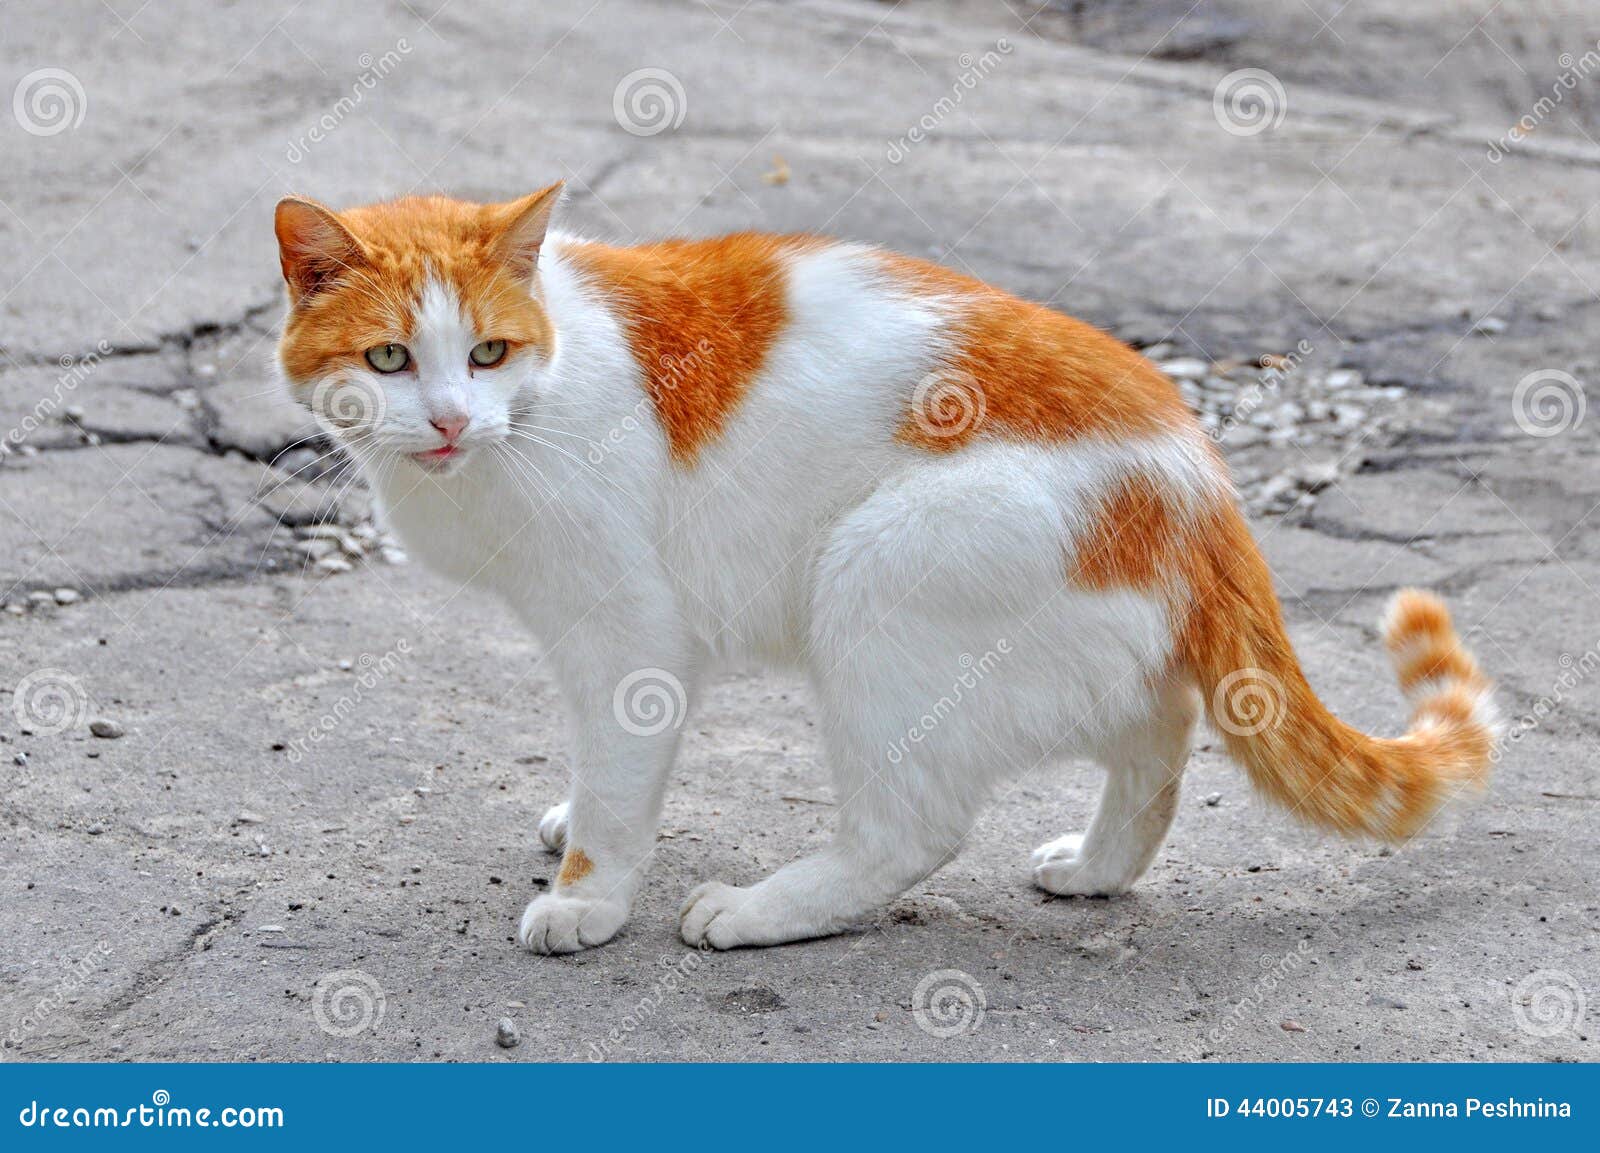  Cat  on the paved road stock image Image of companion 